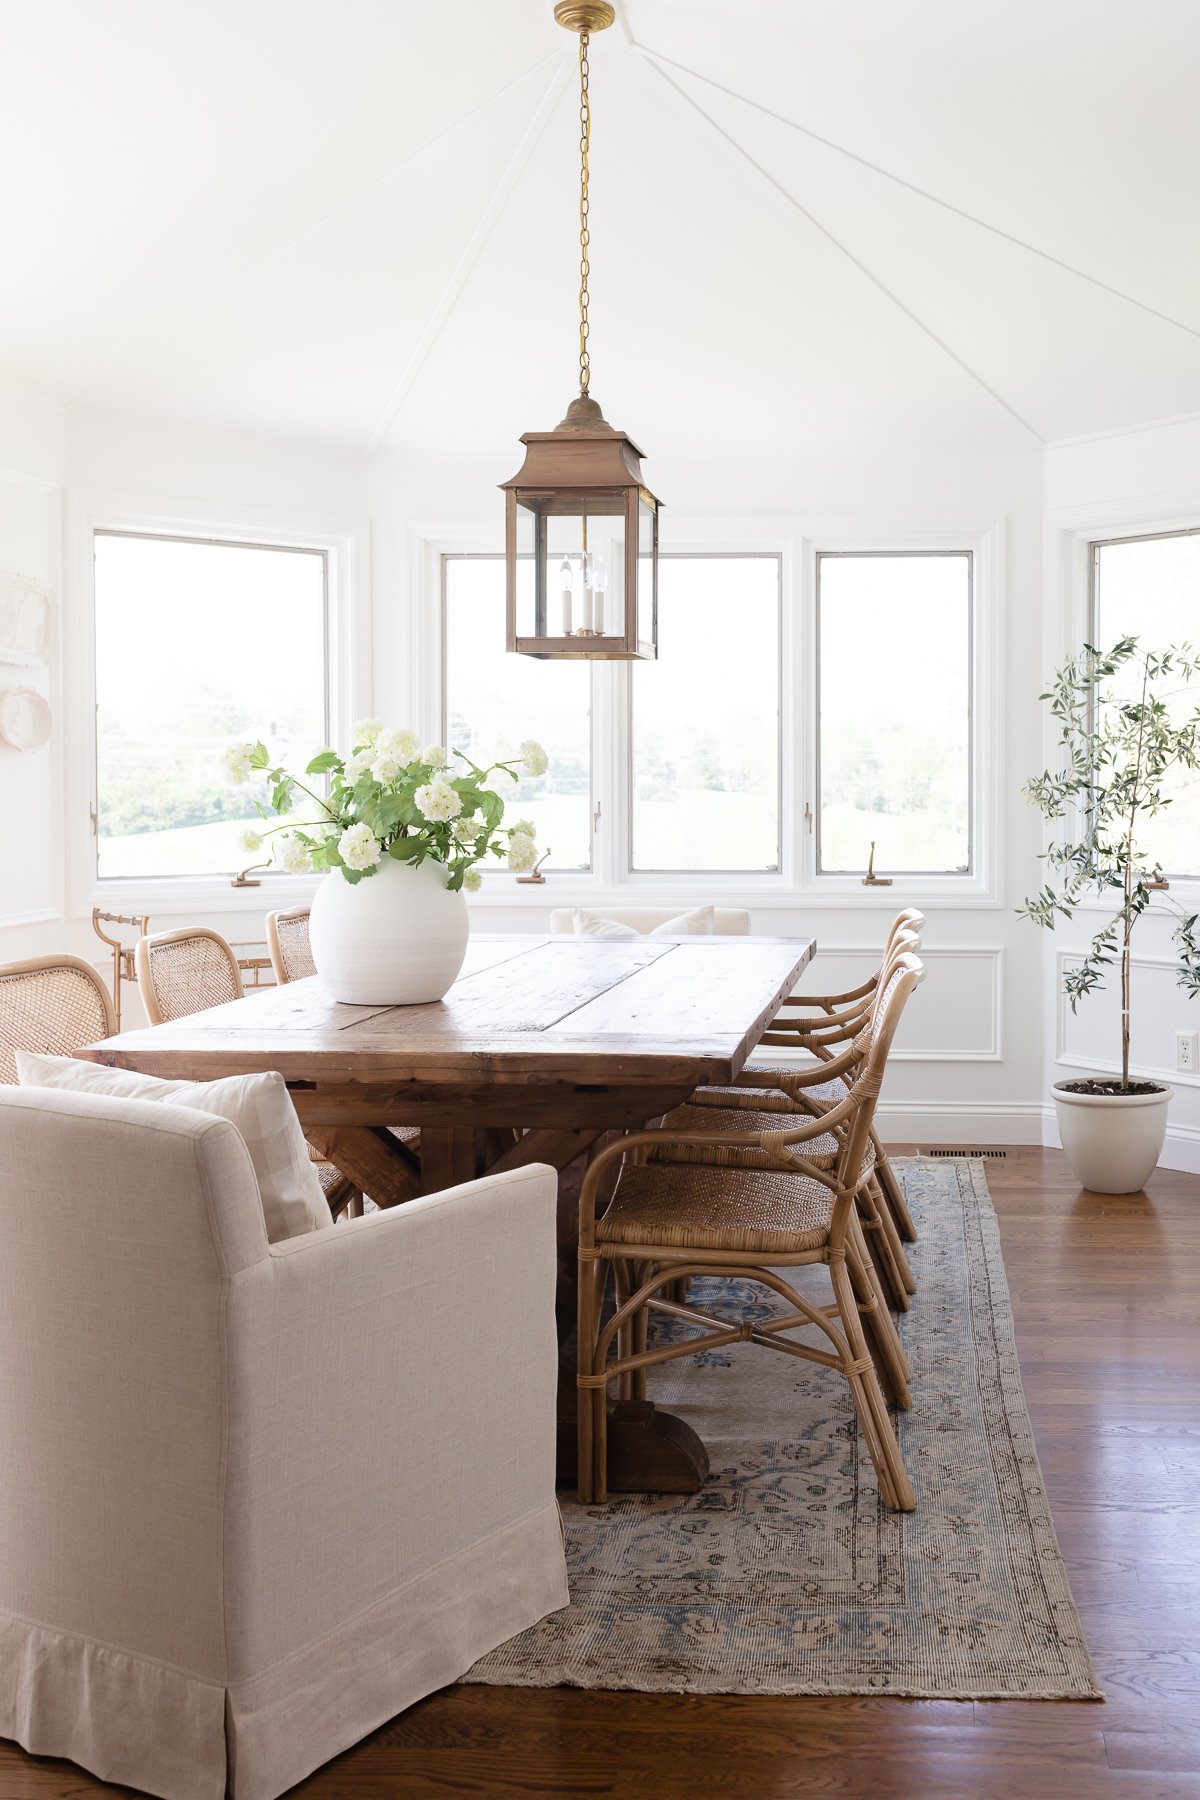 A white windowed breakfast nook with a wood dining table.